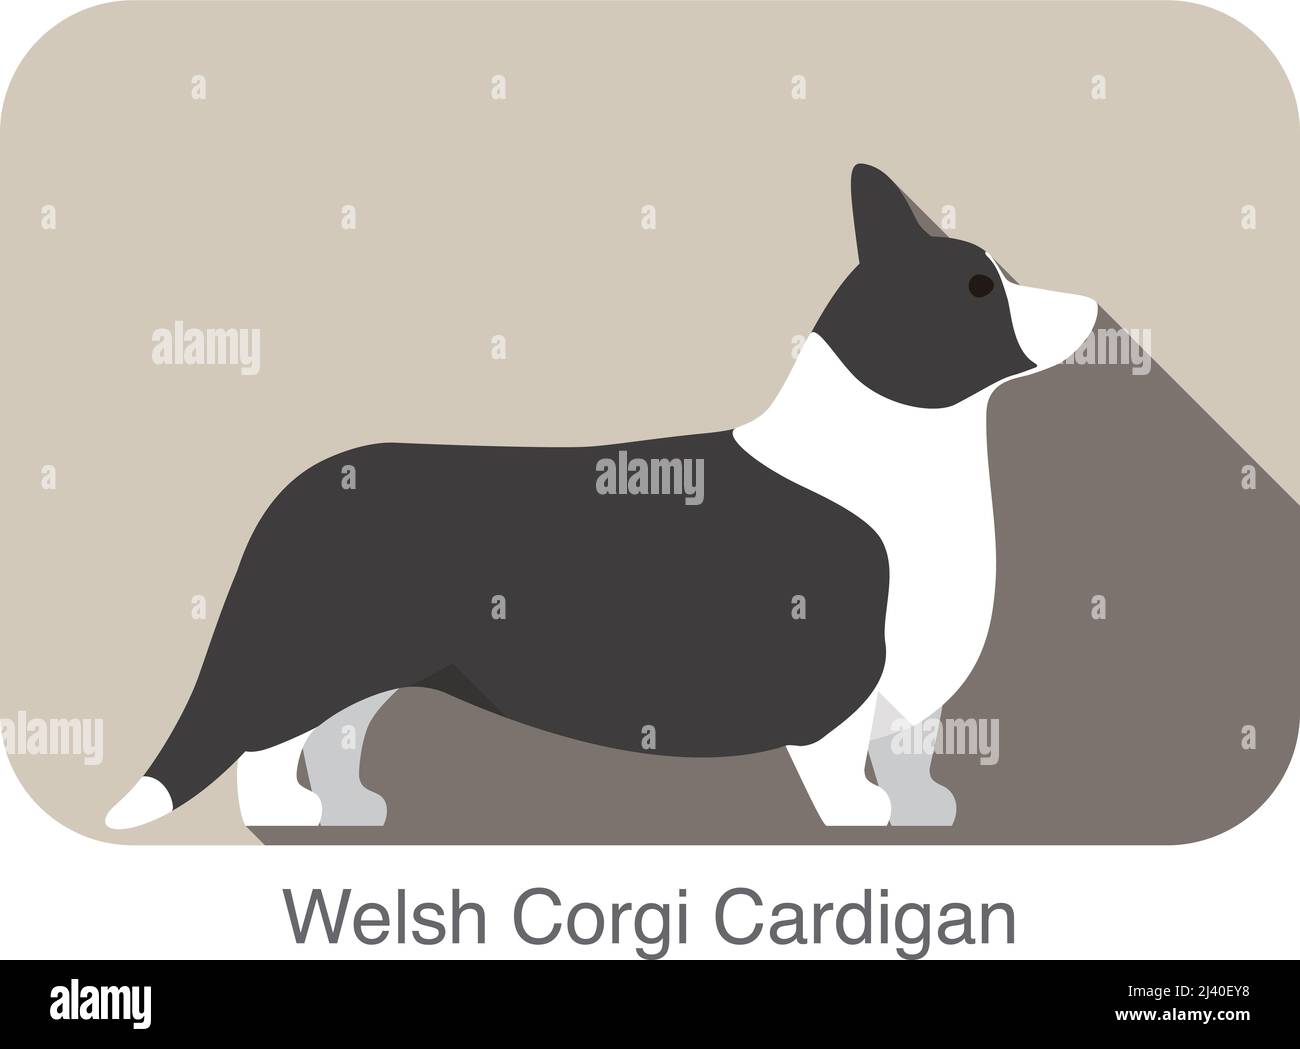 Welsh corgi cardigan standing on the ground, dog breed series Stock Vector